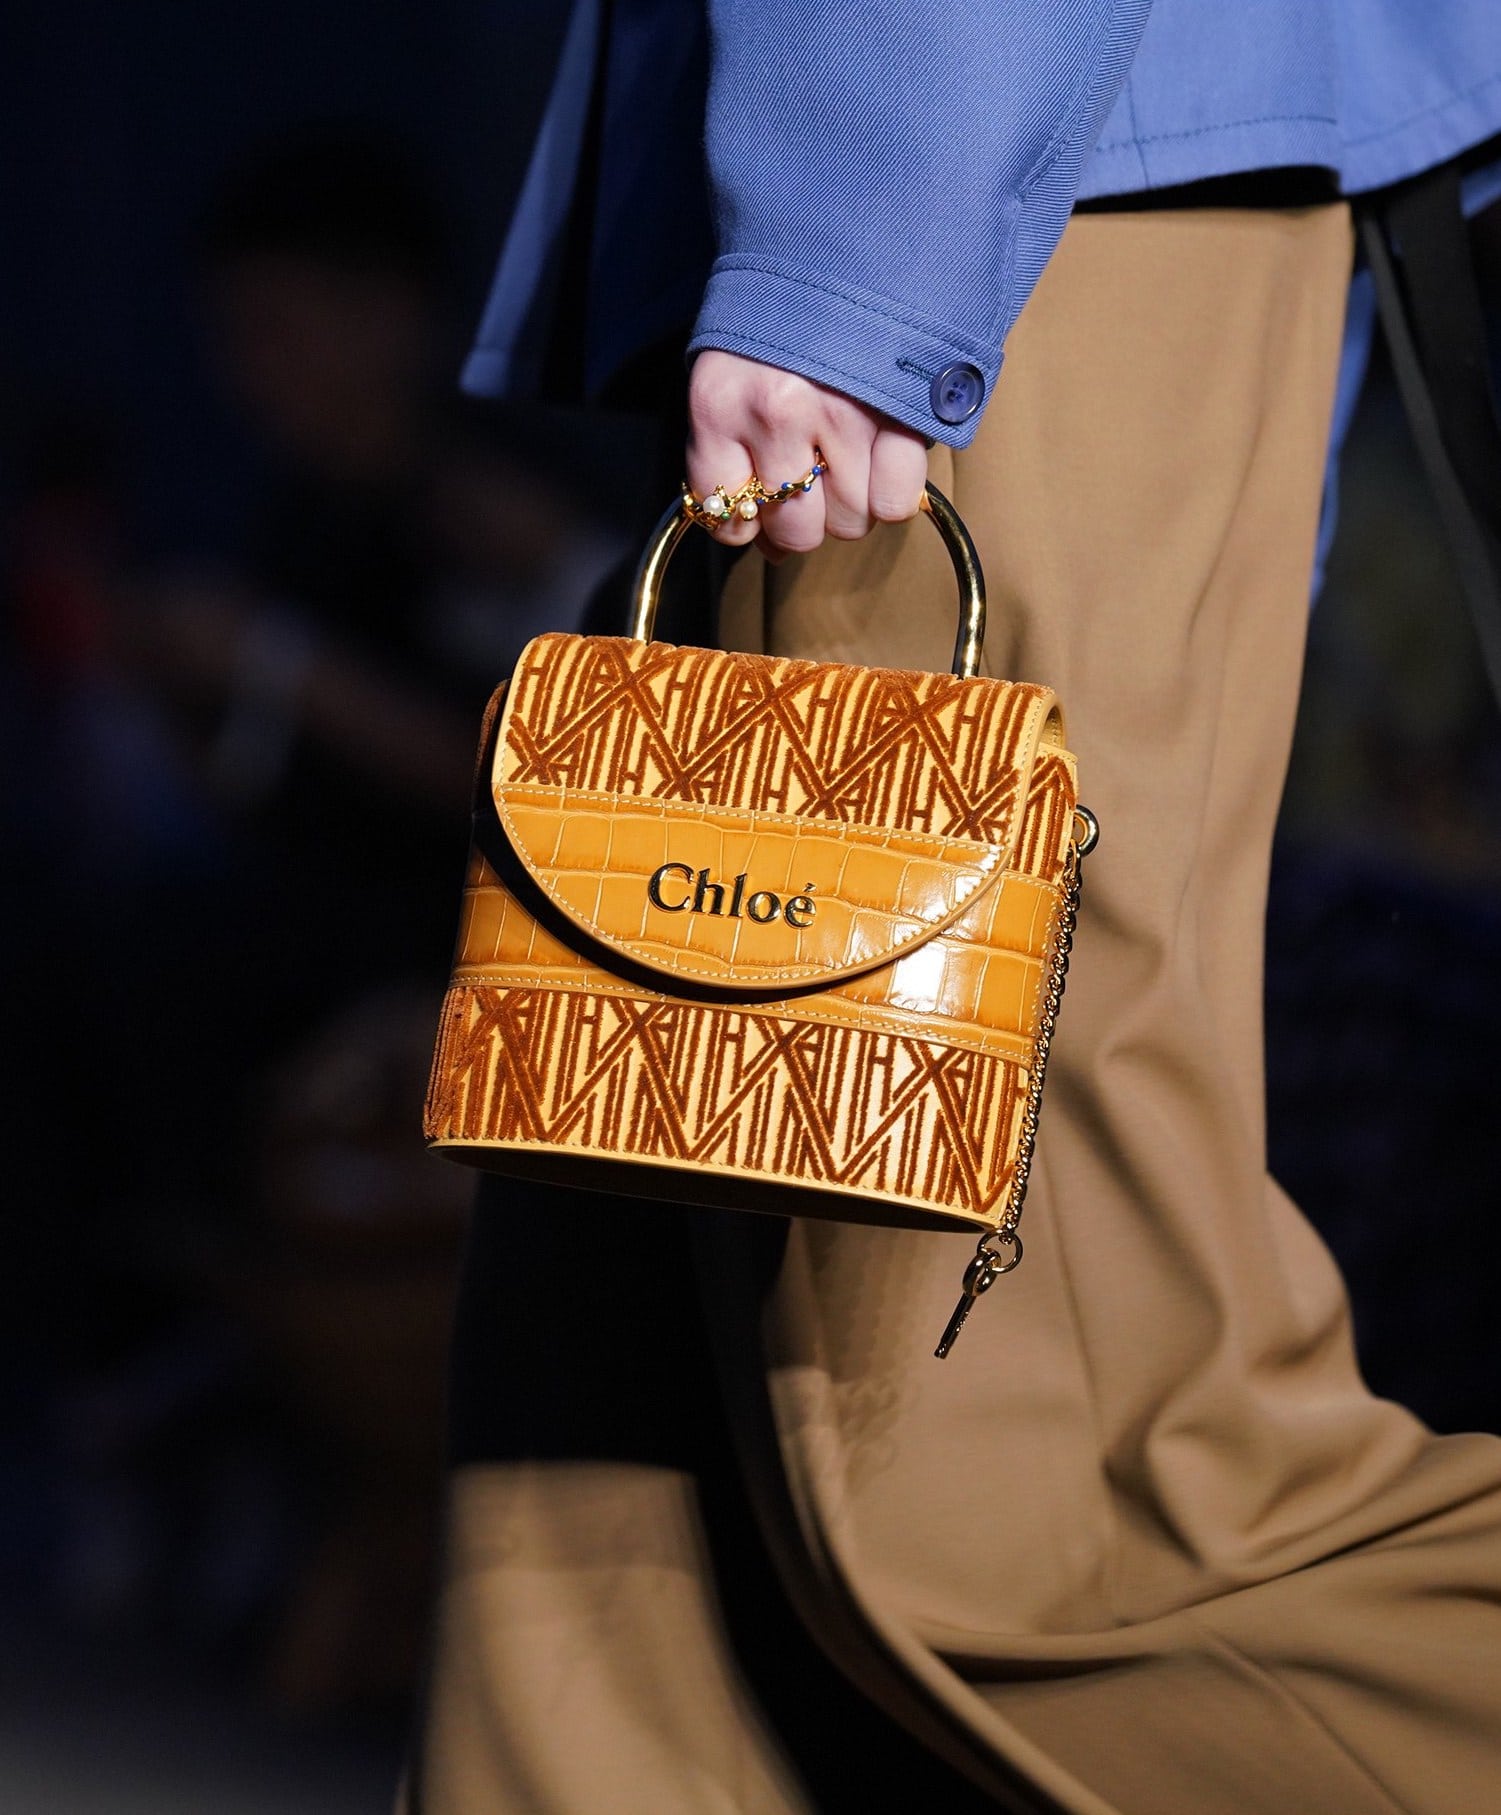 Chloe Resort 2020 Runway Bag Collection | Spotted Fashion1501 x 1815